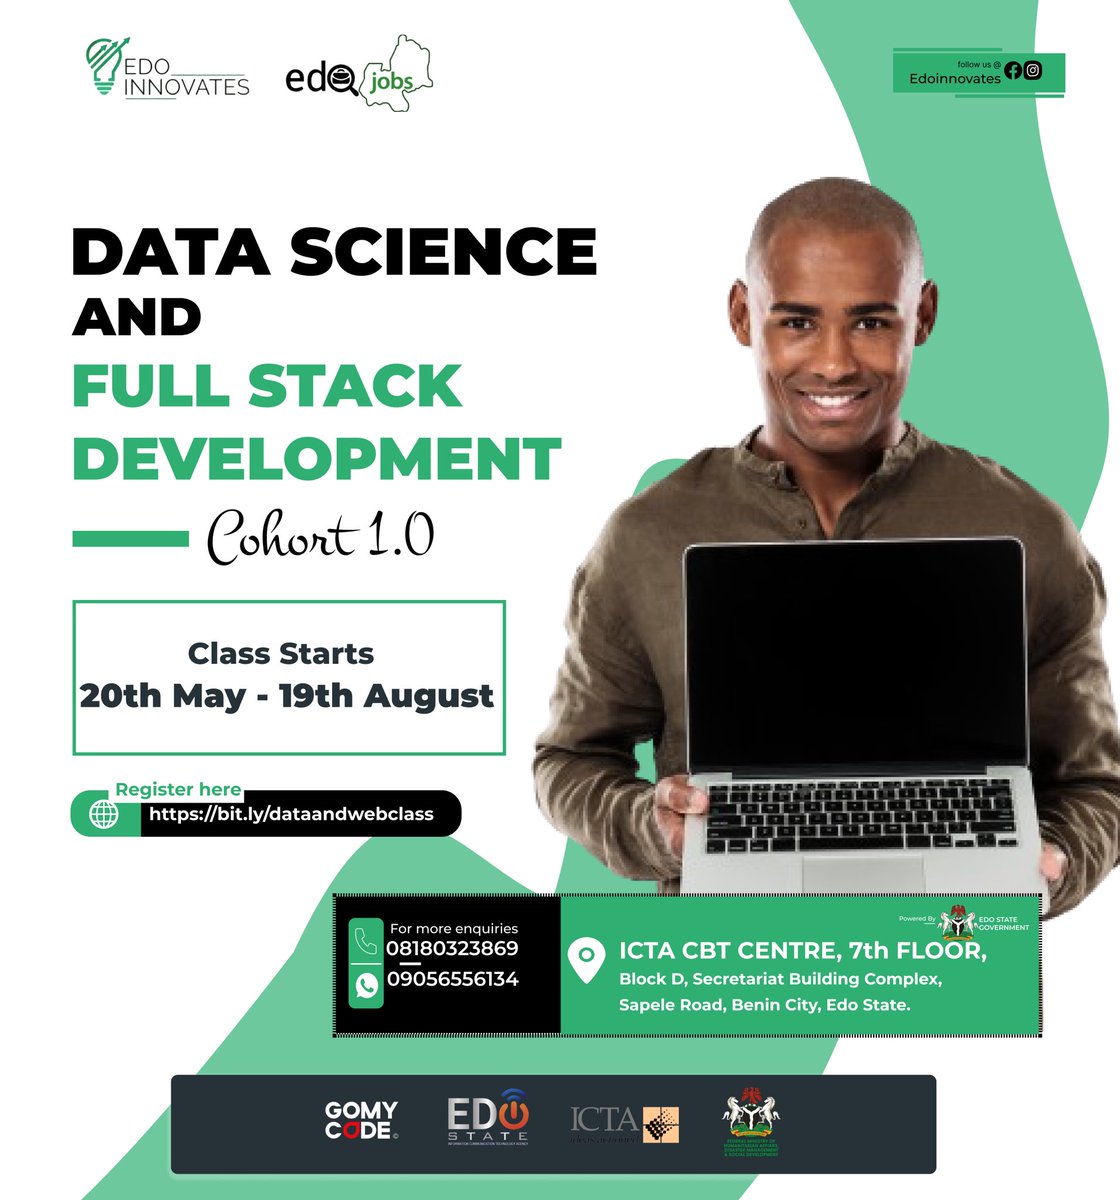 Join Edo Innovates in collaboration with ICTA for a FREE 4-MONTHS DATA SCIENCE and FULLSTACK DEVELOPMENT TRAINING, COHORT 1. Visit bit.ly/dataandwebclass to register! Venue:- ICTA CBT CENTER, 7th Floor, Block D, Secretariat Building Complex, Sapele Road. Benin City. Edo State.